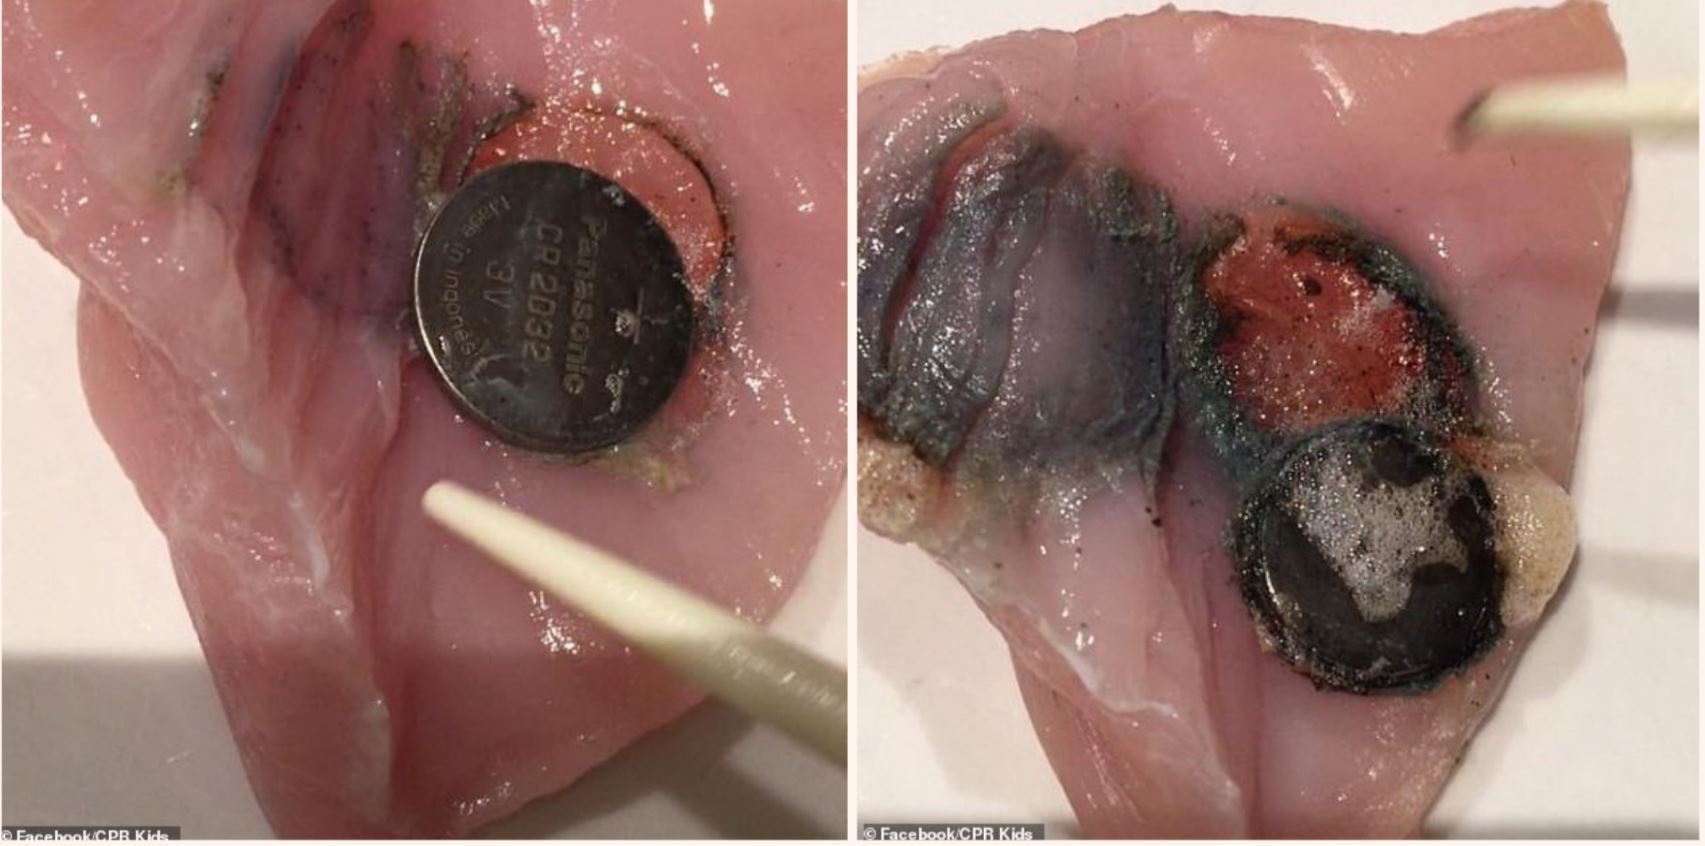 Battery experiment proves how f**ked your insides are if swallowed